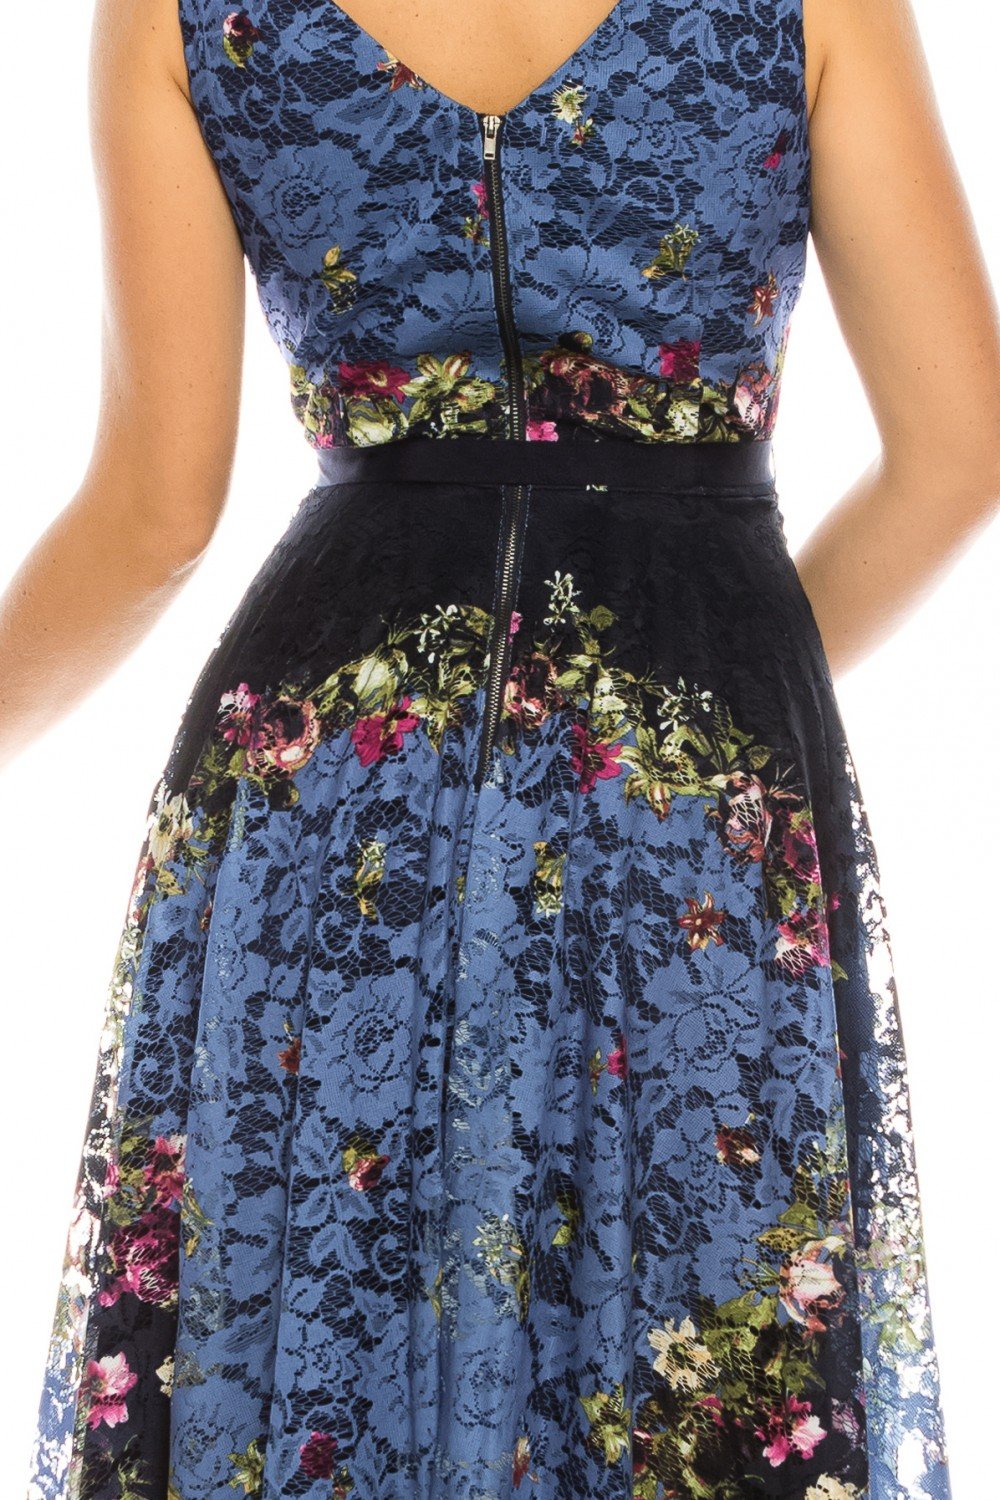 Gabby Skye - 57369MG Sleeveless Floral Print Lace A-Line Dress In Blue and Black